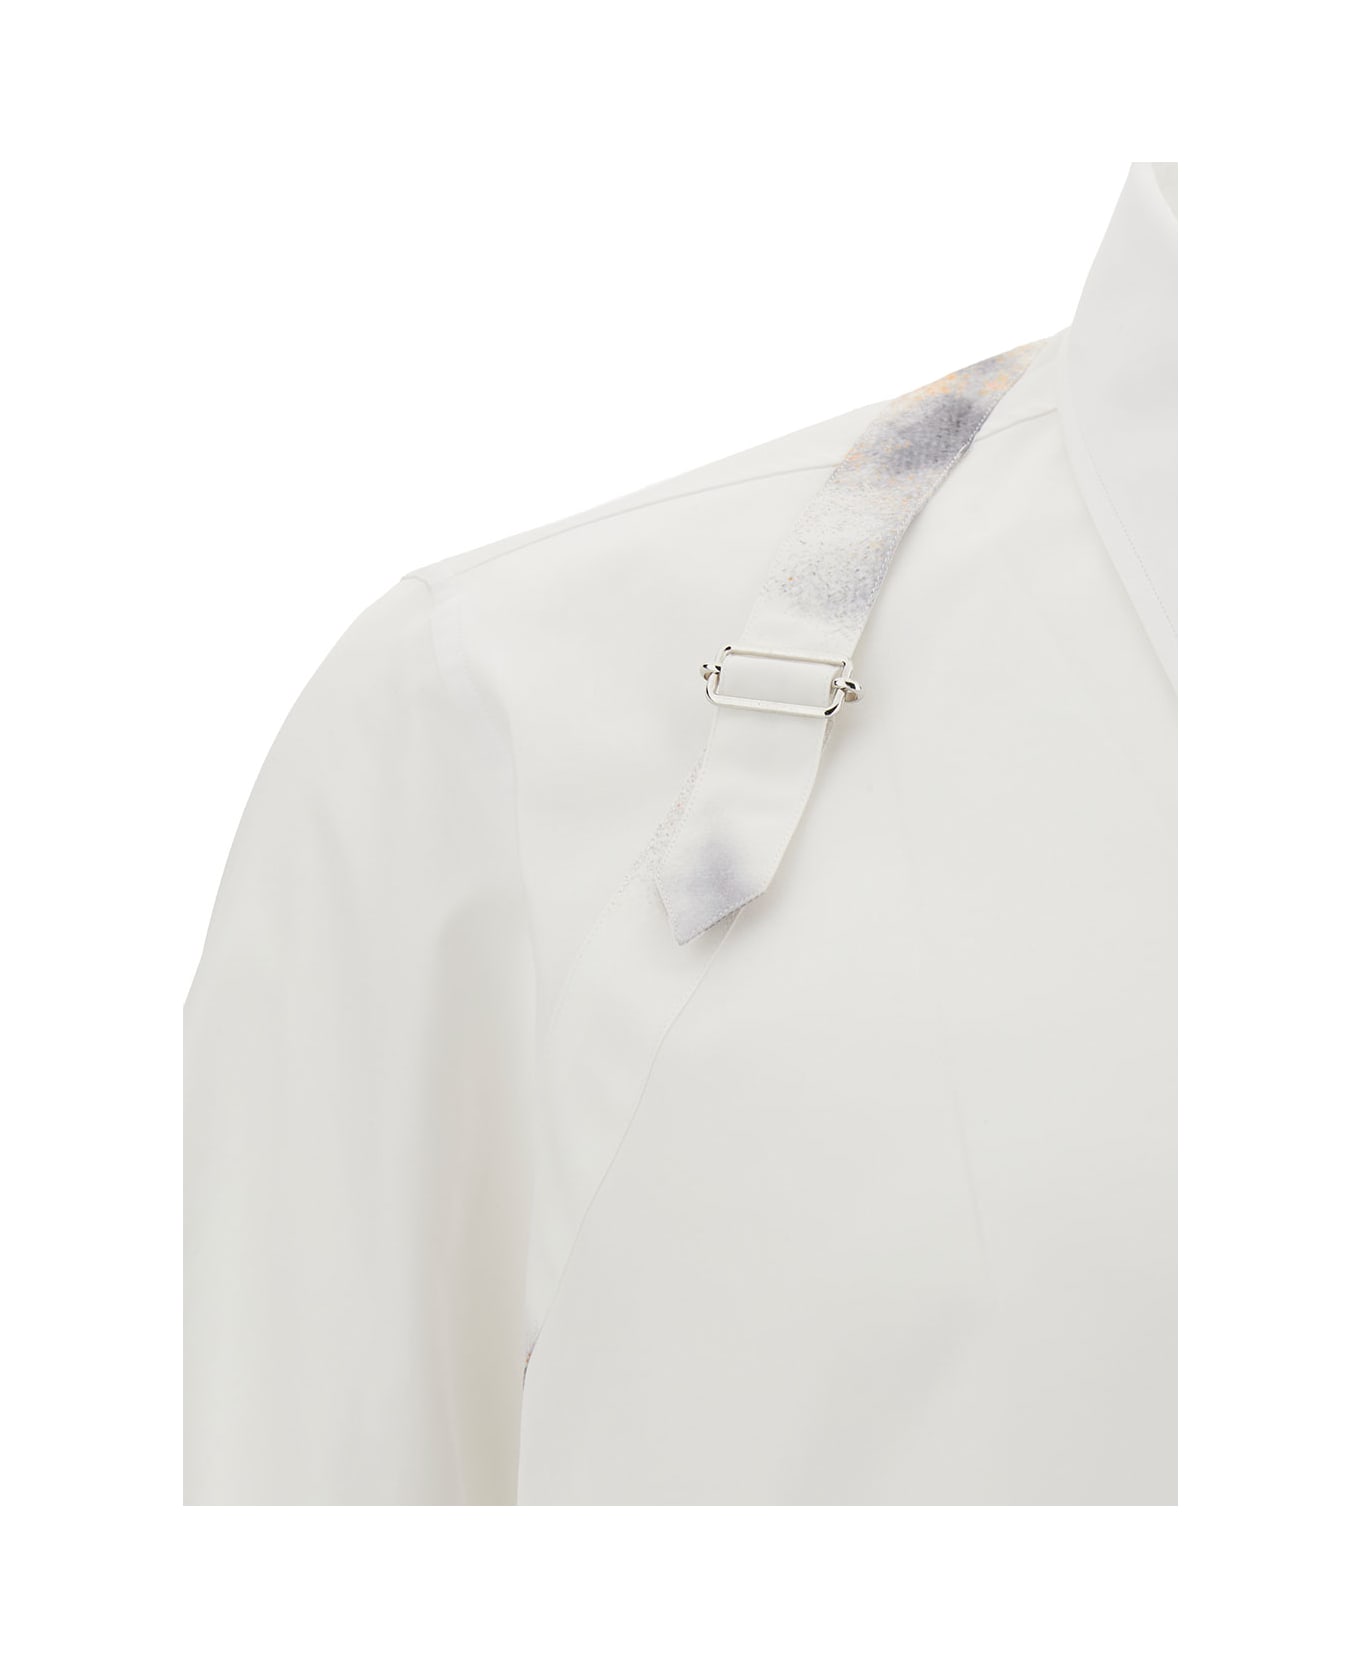 Alexander McQueen White Shirt With Printed Harness In Cotton Man - Optical white